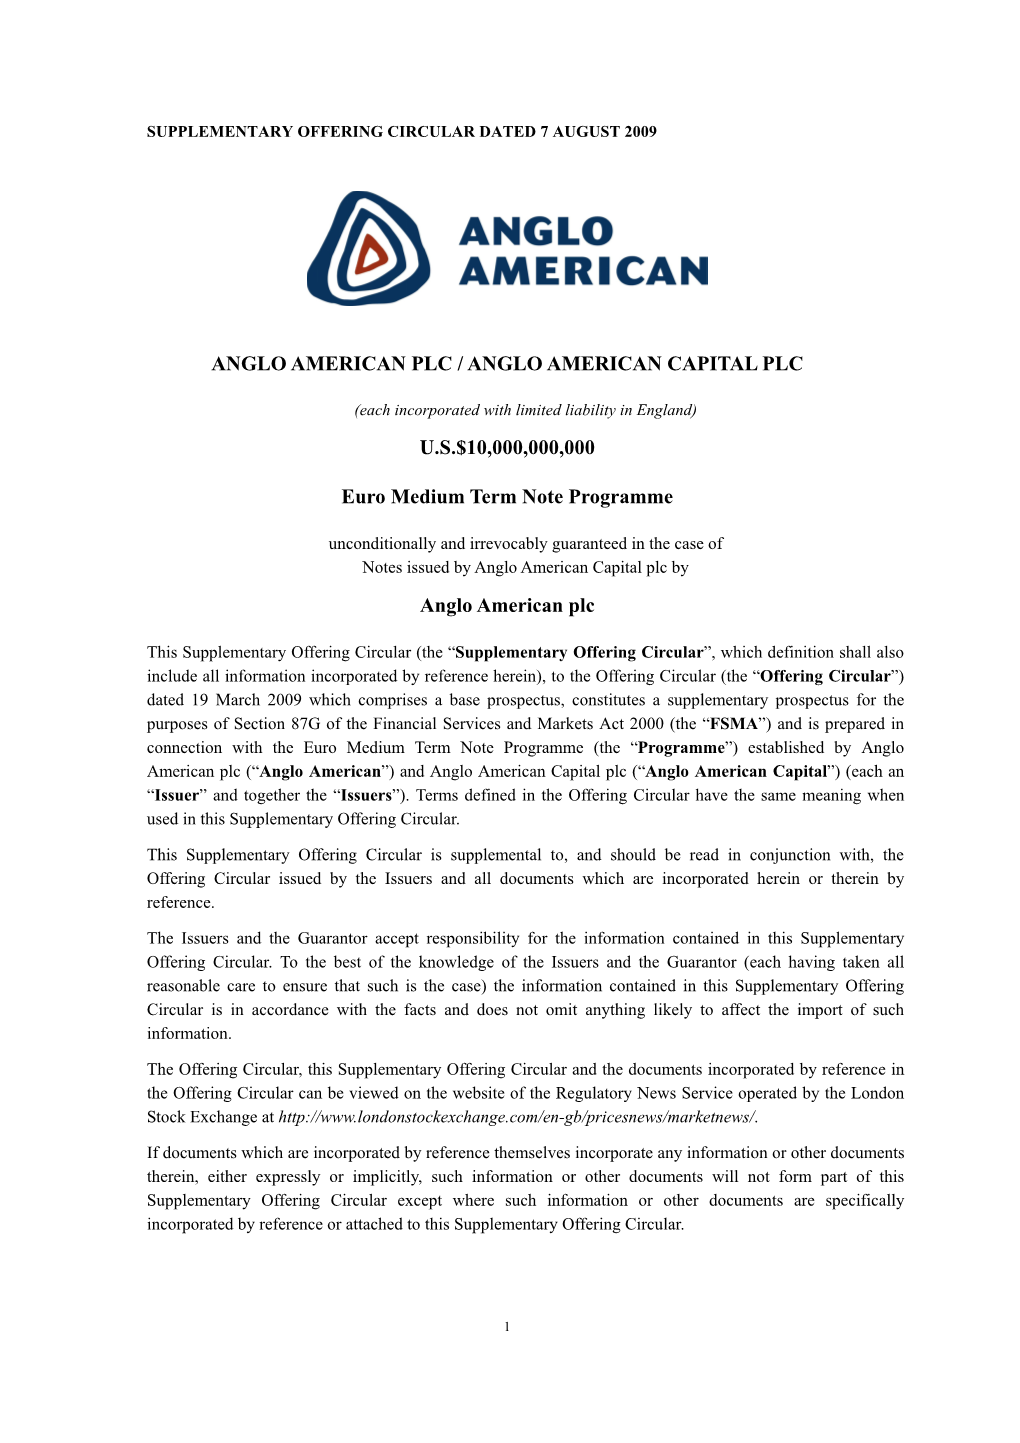 Anglo American Supplementary Offering Circular